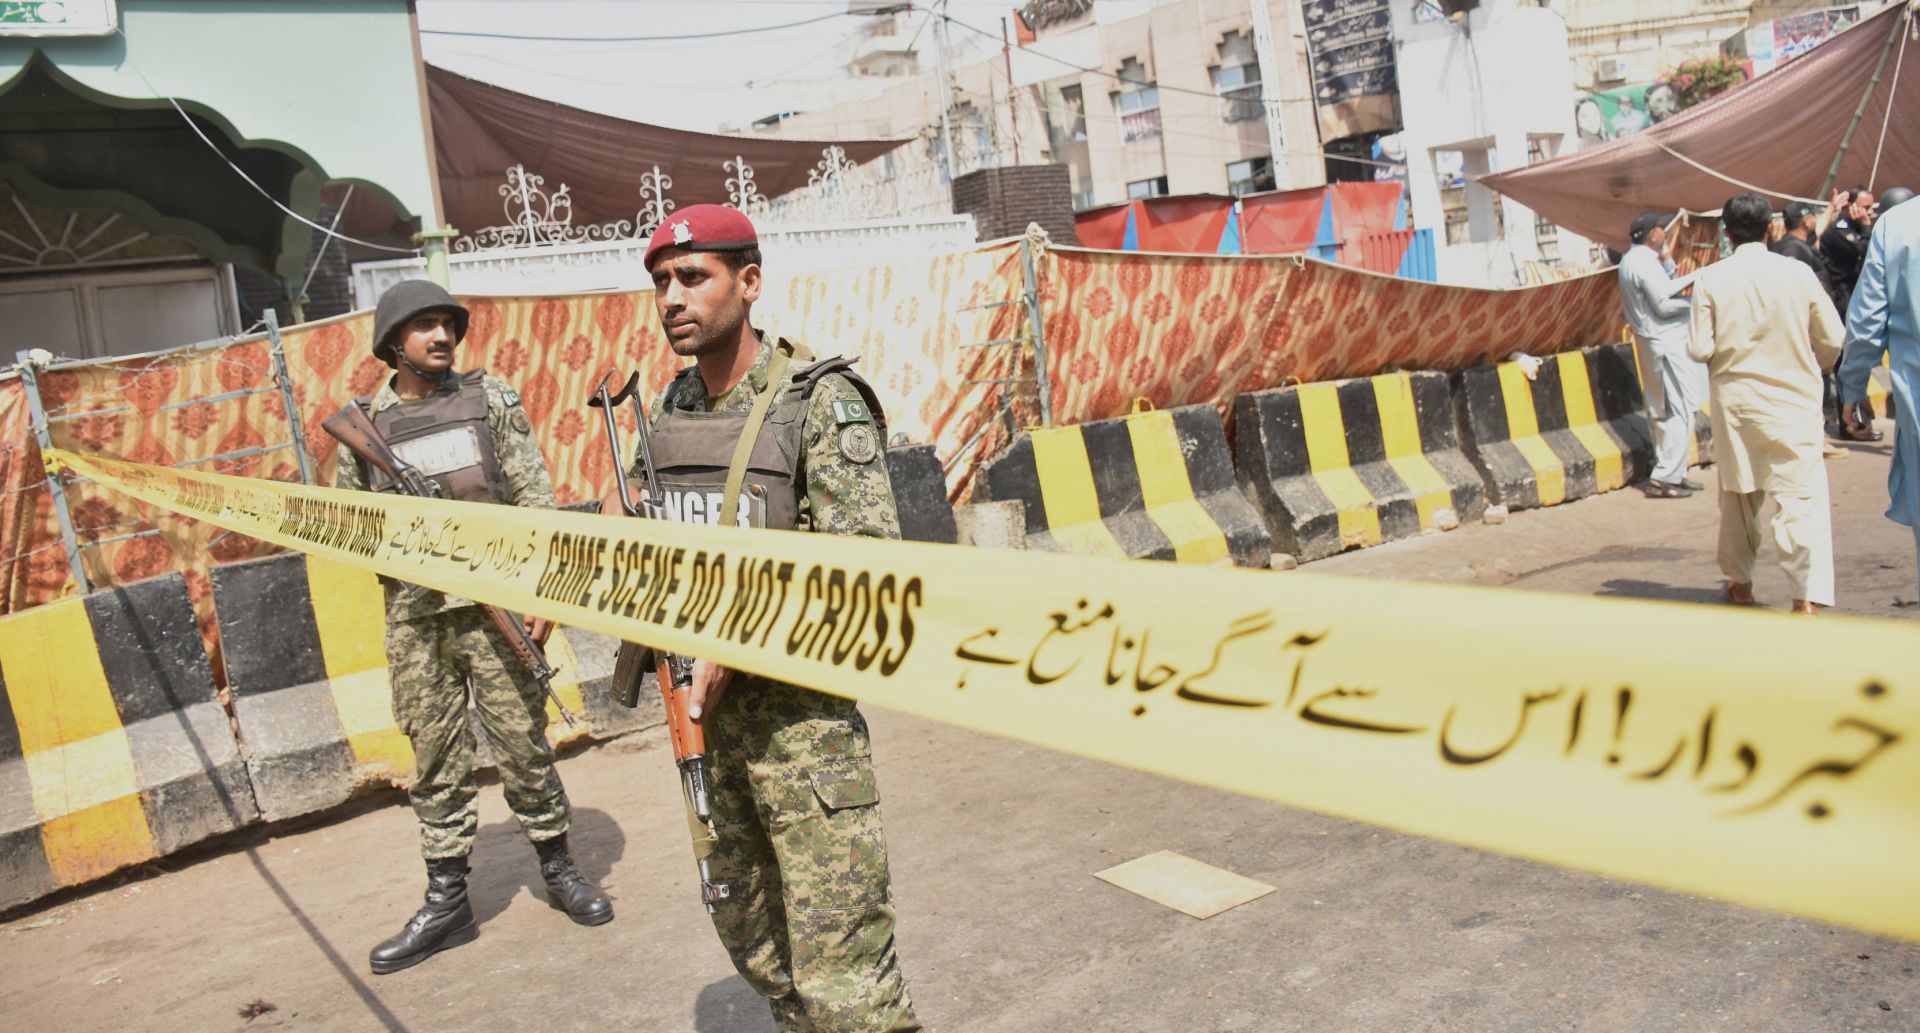 epa07554886 Pakistani security officials inspect the scene of a suicide bomb attack that targeted a Police vehicle outside the Sufi Muslim Data Gunj Buksh shrine in Lahore, Pakistan, 08 May 2019. At least eight people including five police were killed and 25 were injured in the blast near the Data Darbar Sufi shrine, one of the largest in South Asia. Security measures had been heightened at religious sites in the city for the start of the Muslim holy month of Ramadan, which started on Tuesday in Pakistan.  EPA/STRINGER